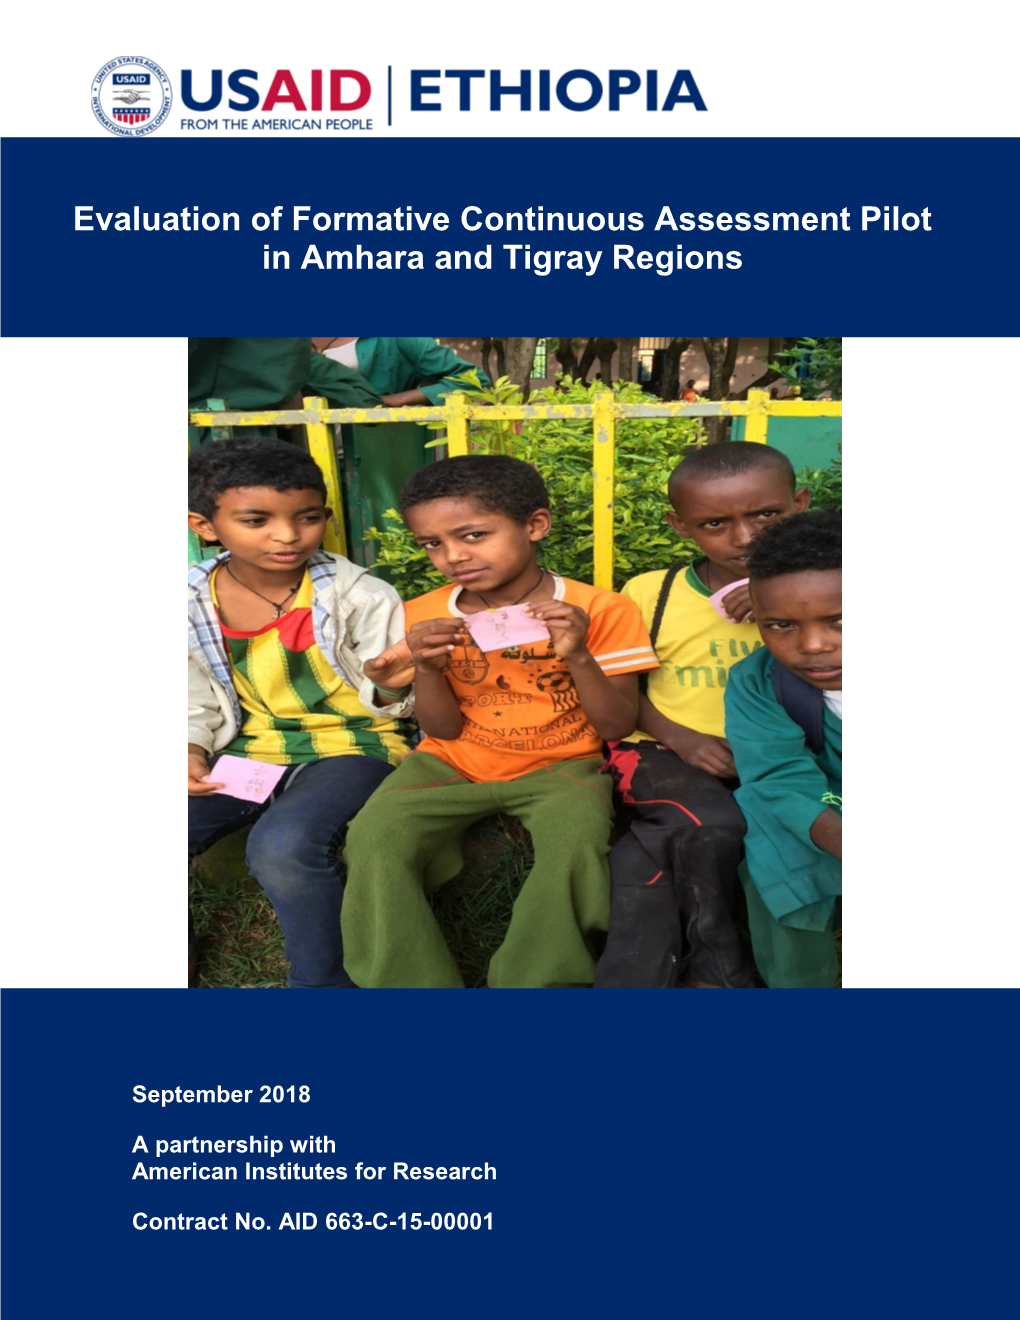 Evaluation of Formative Continuous Assessment Pilot in Amhara and Tigray Regions